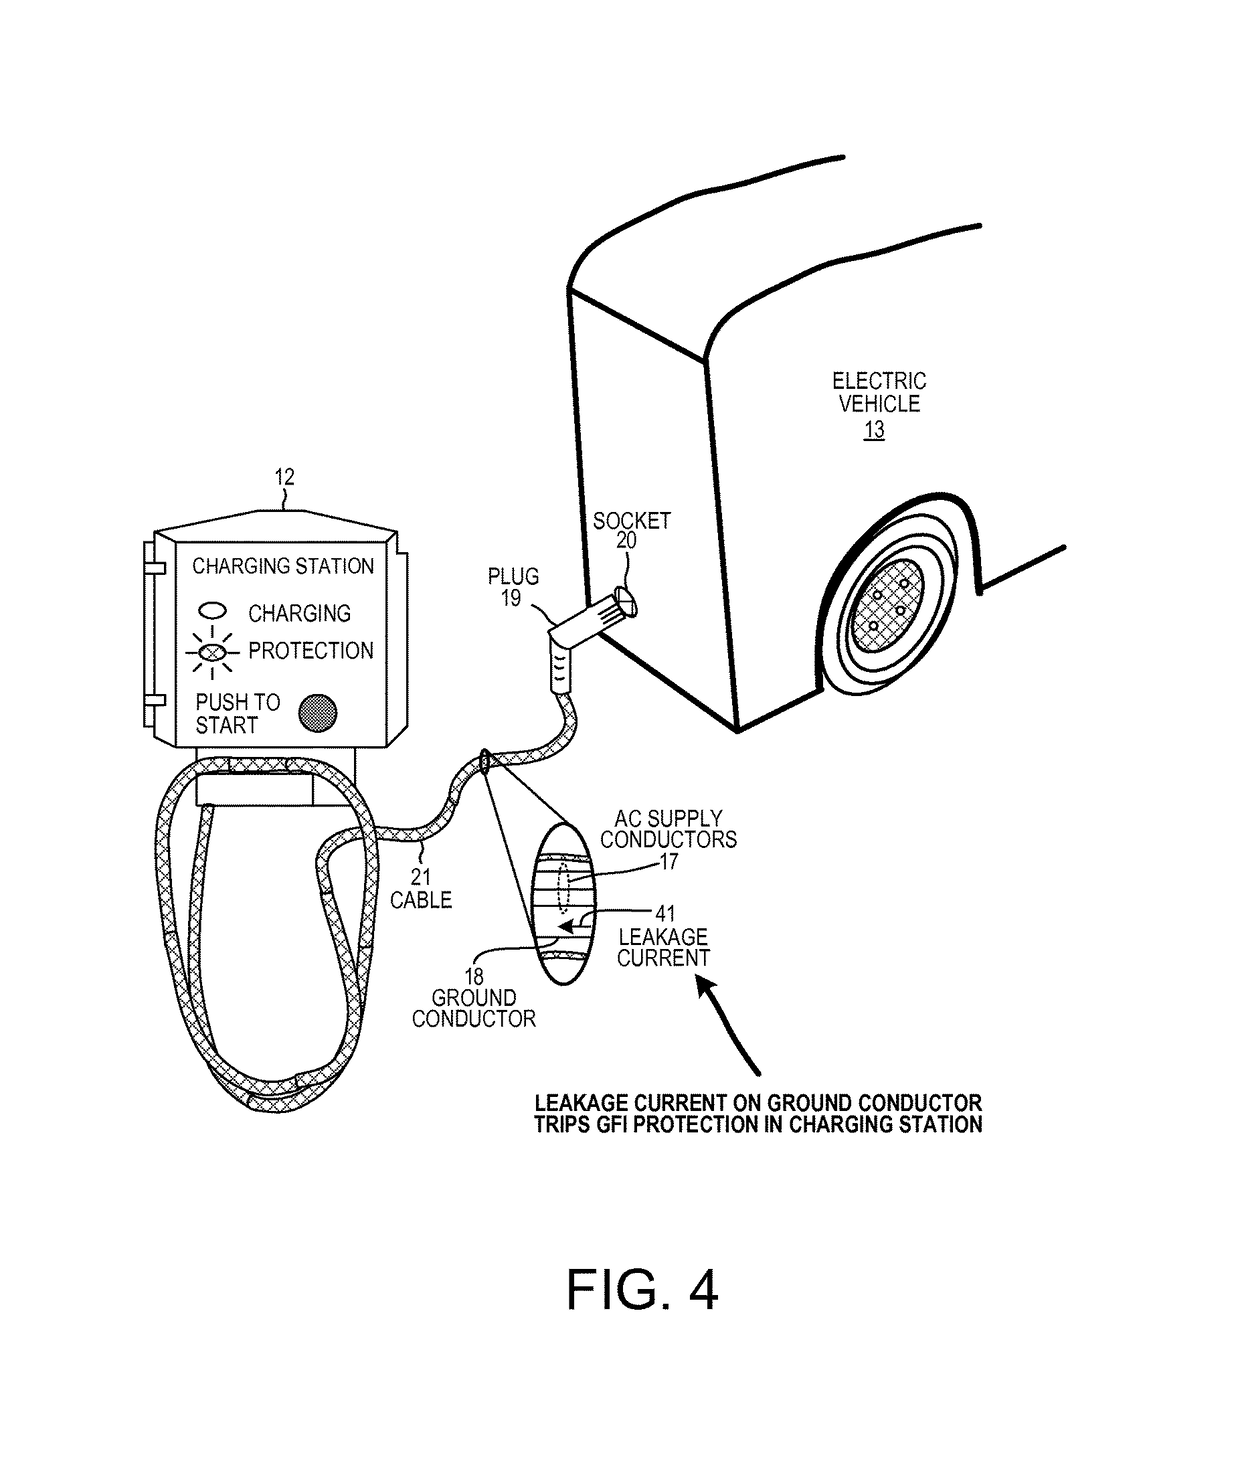 Generating leakage canceling current in electric vehicle charging systems